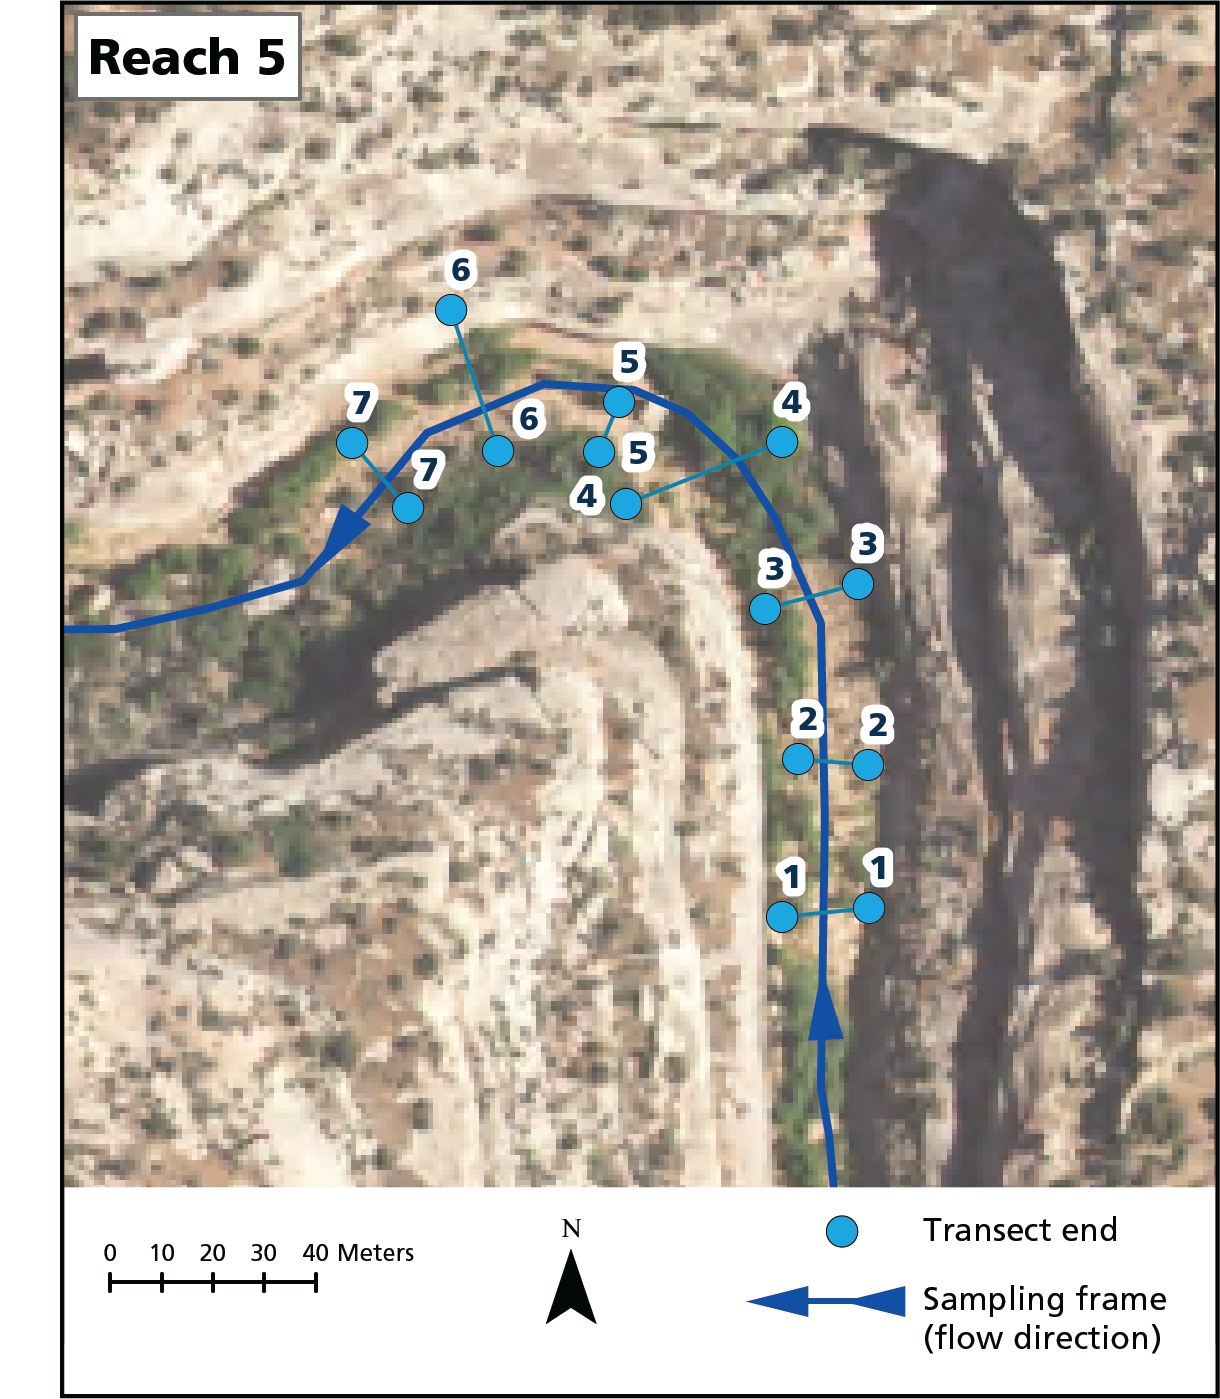 Aerial view of Reach 5 with 7 transects labeled.